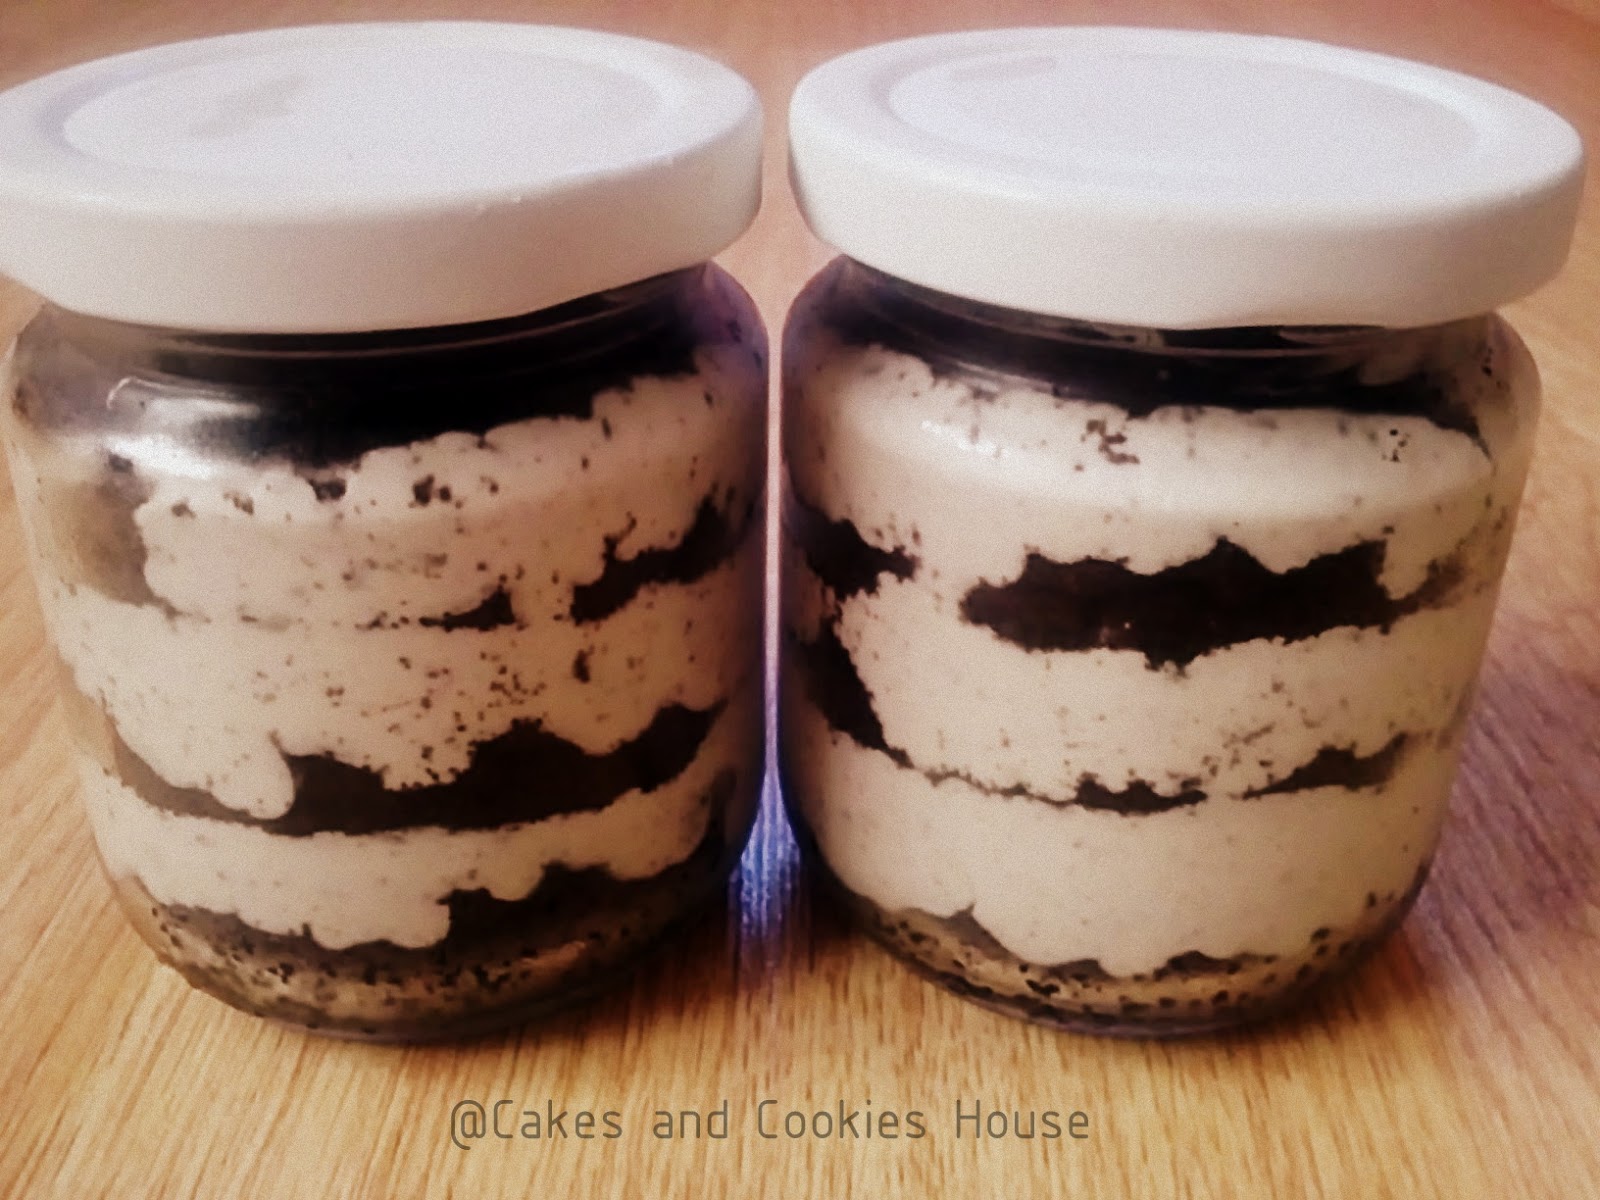 Cakes and cookies house: Oreo Cheese Cake in Jar